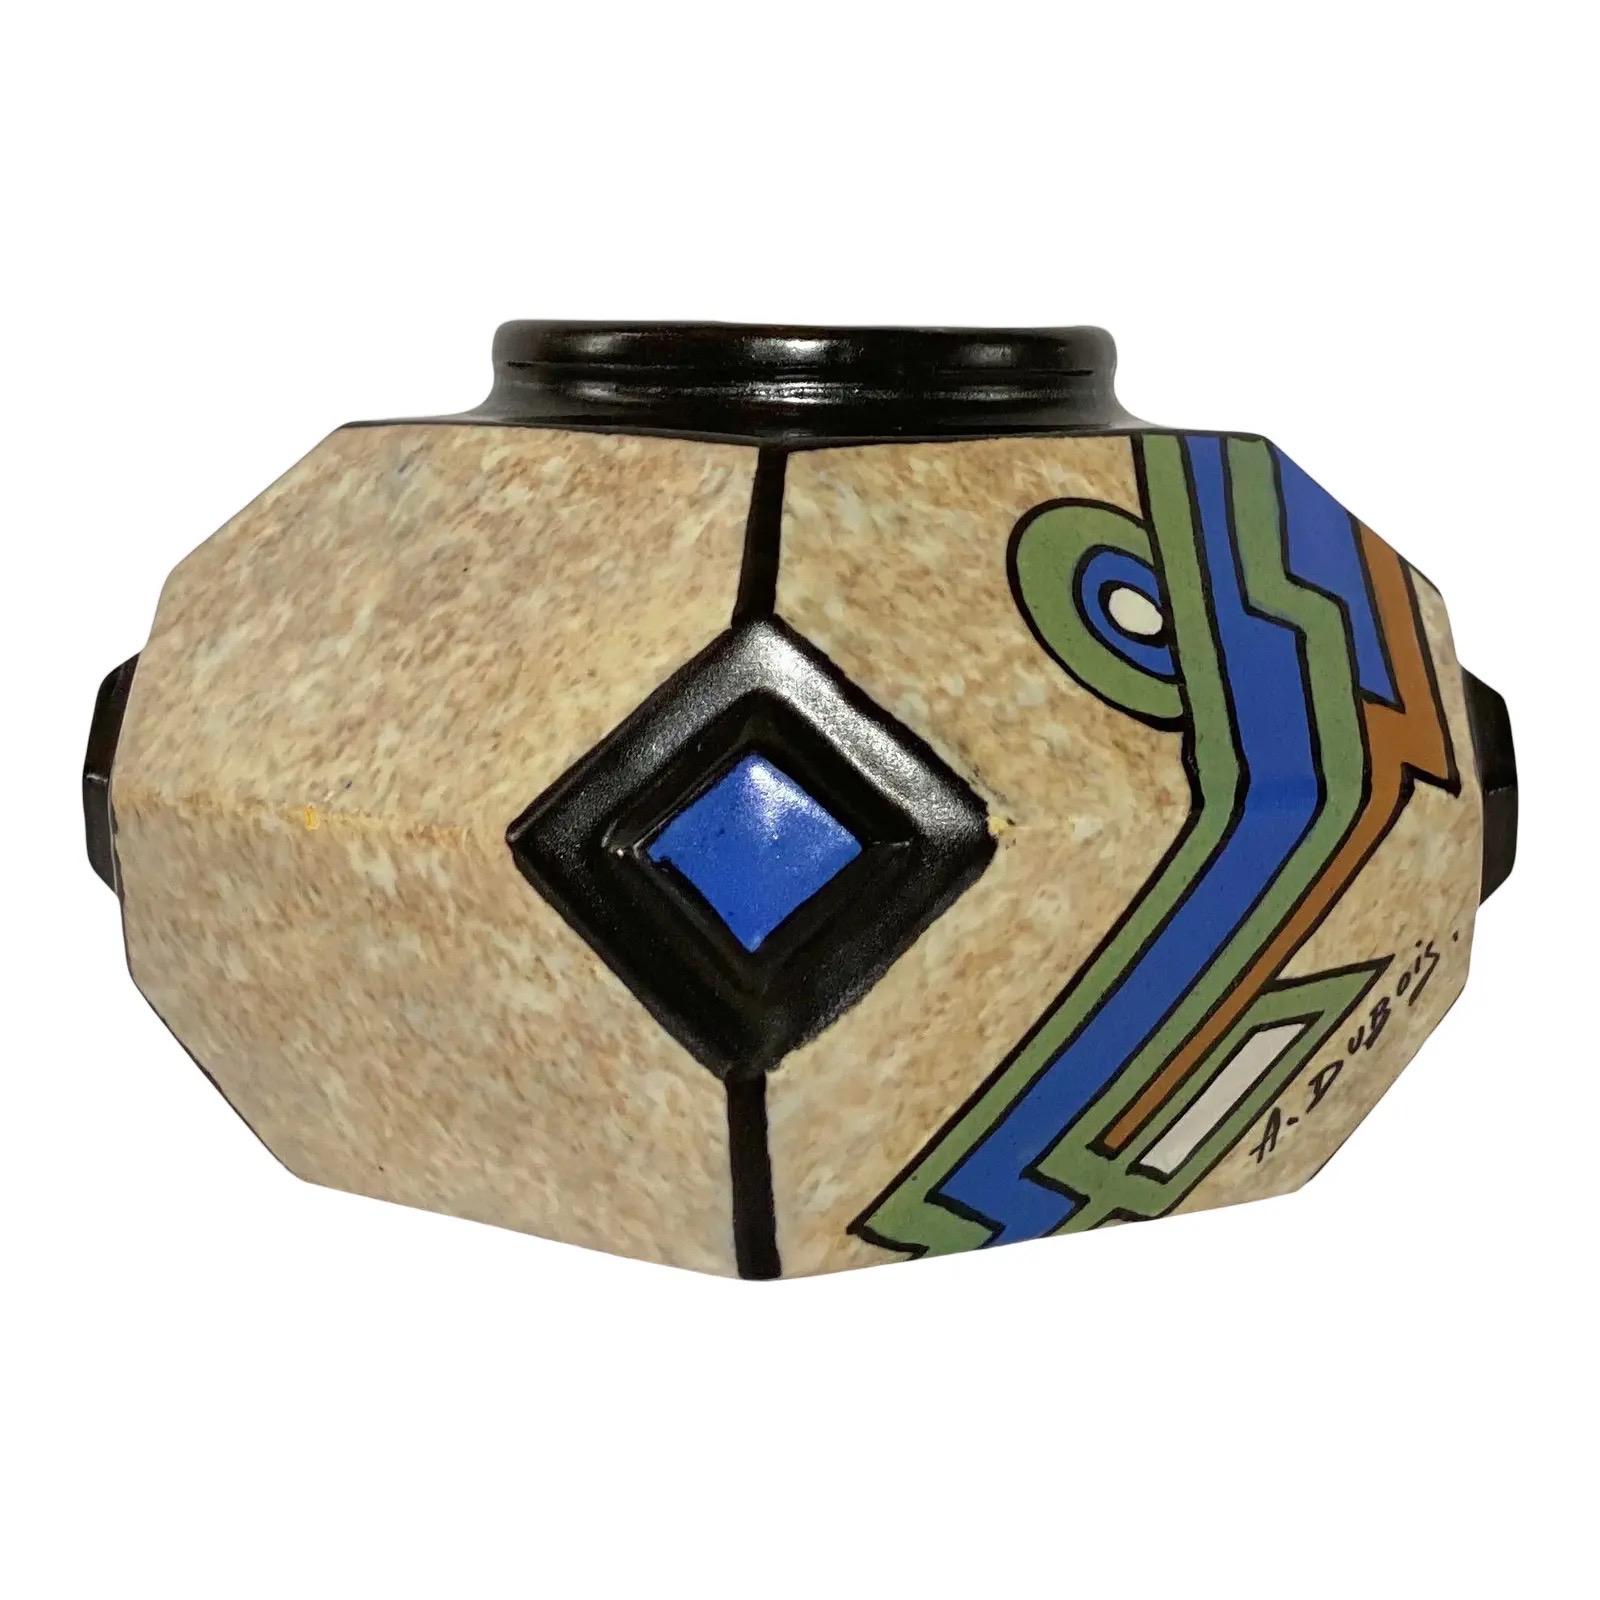 We are very pleased to offer a hand painted, cubist vase signed by the Belgian artist A. Dubois, circa the 1930s. The polychrome vase showcases blue, green, and brown geometric panels on a speckled tan and white background. In great vintage